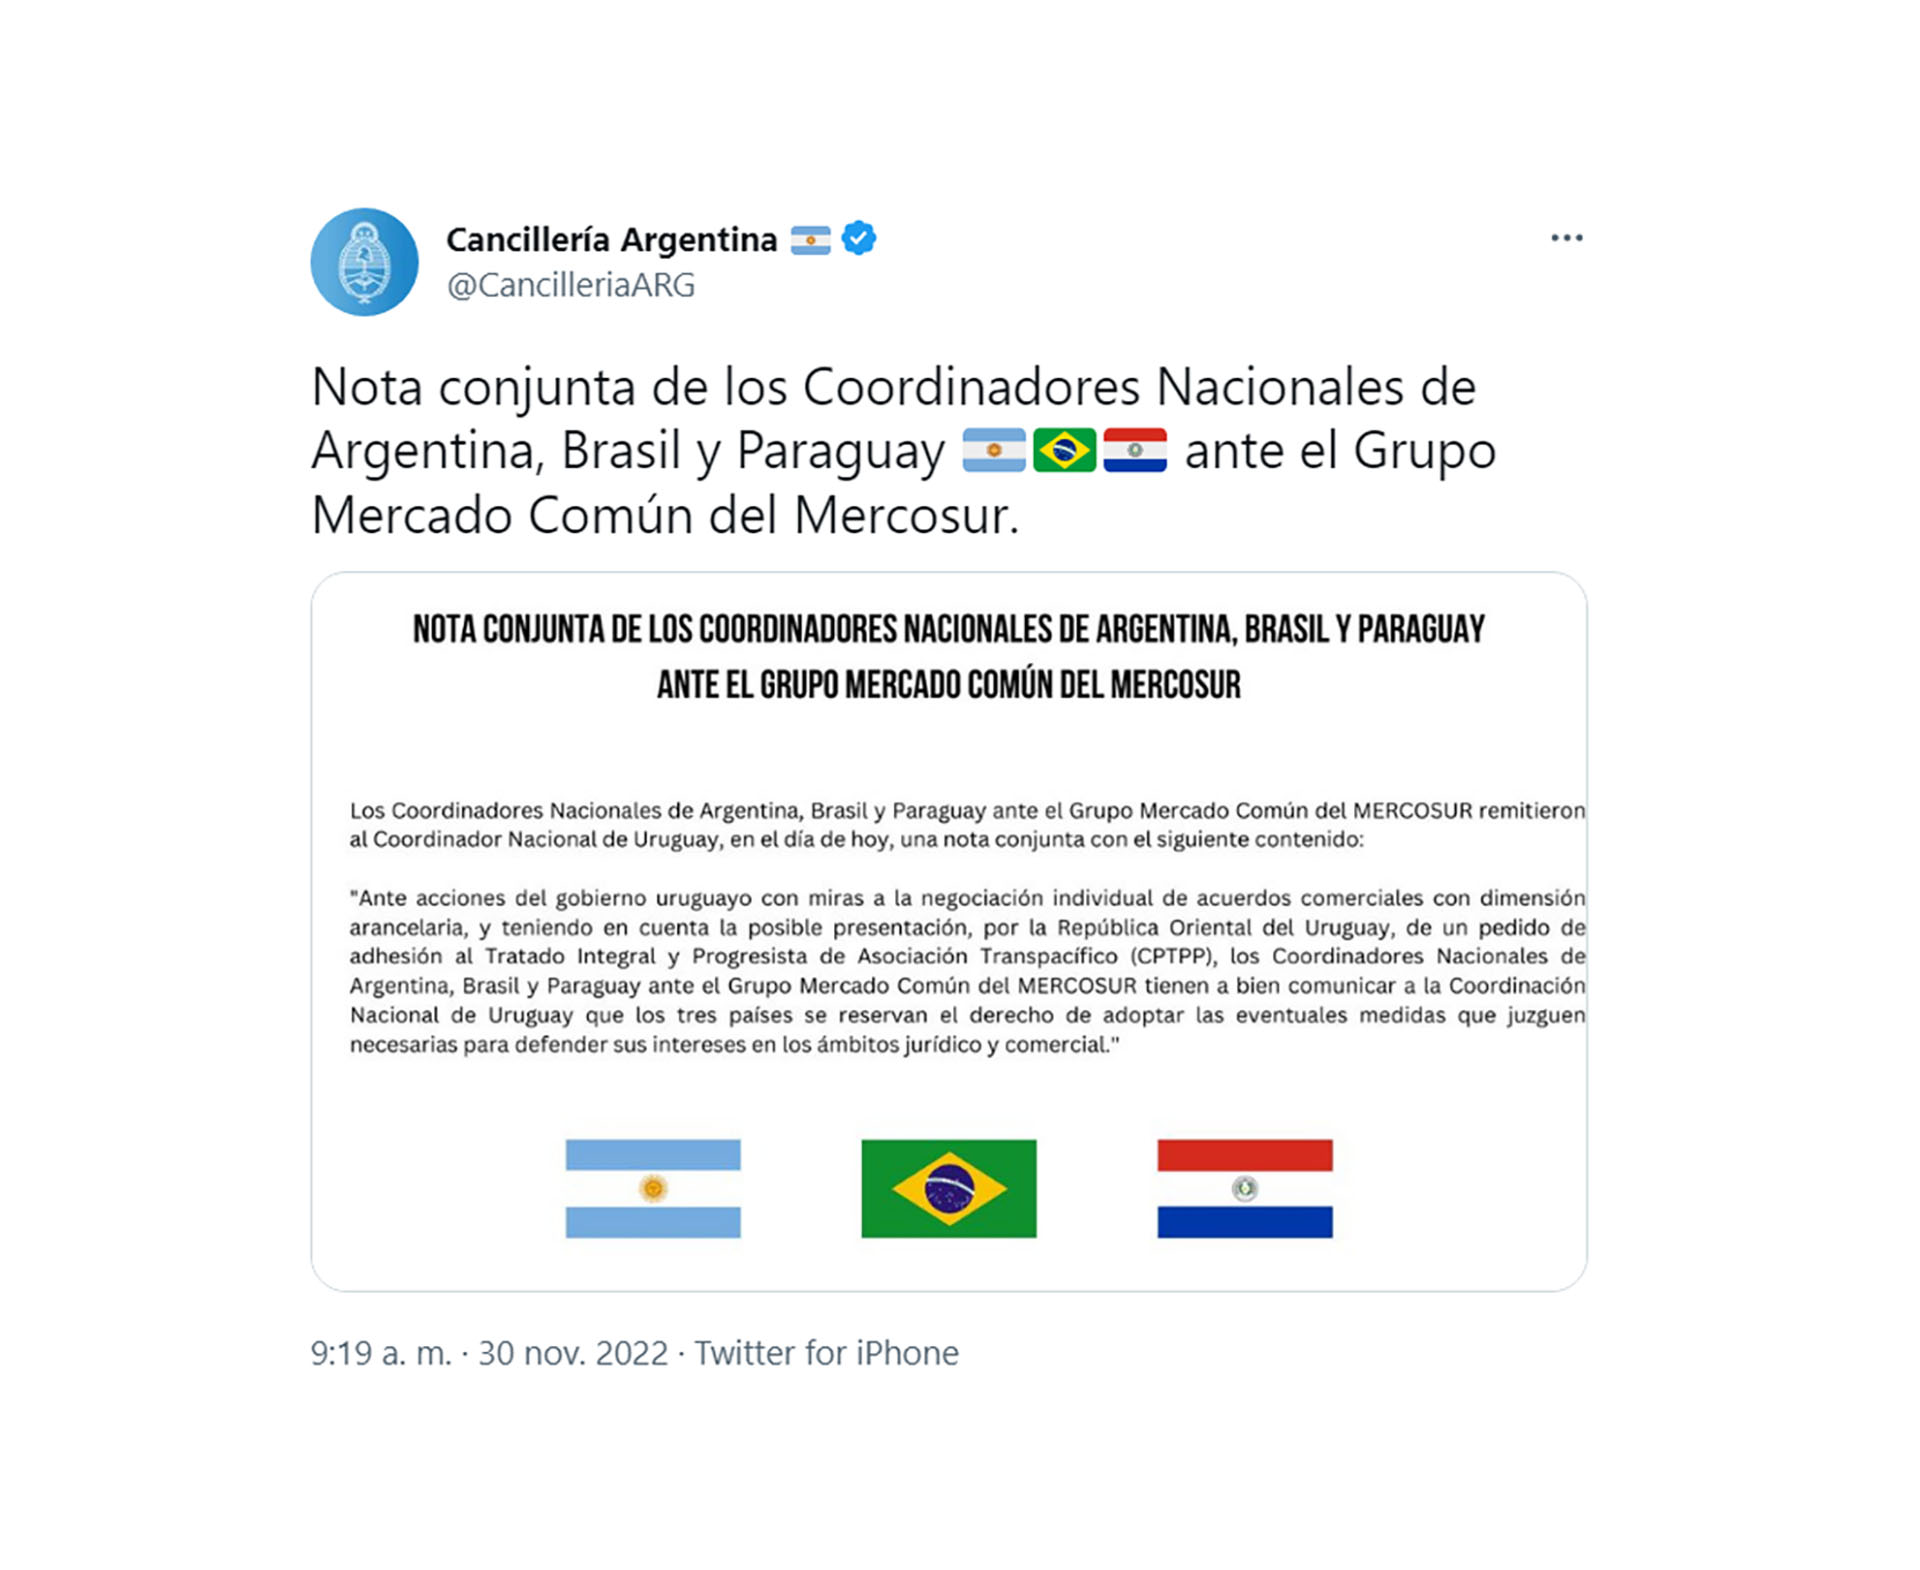 A joint tweet by the foreign ministries of Argentina, Brazil and Paraguay warned Uruguay of legal retaliation if it insisted on negotiating free trade agreements outside Mercosur.